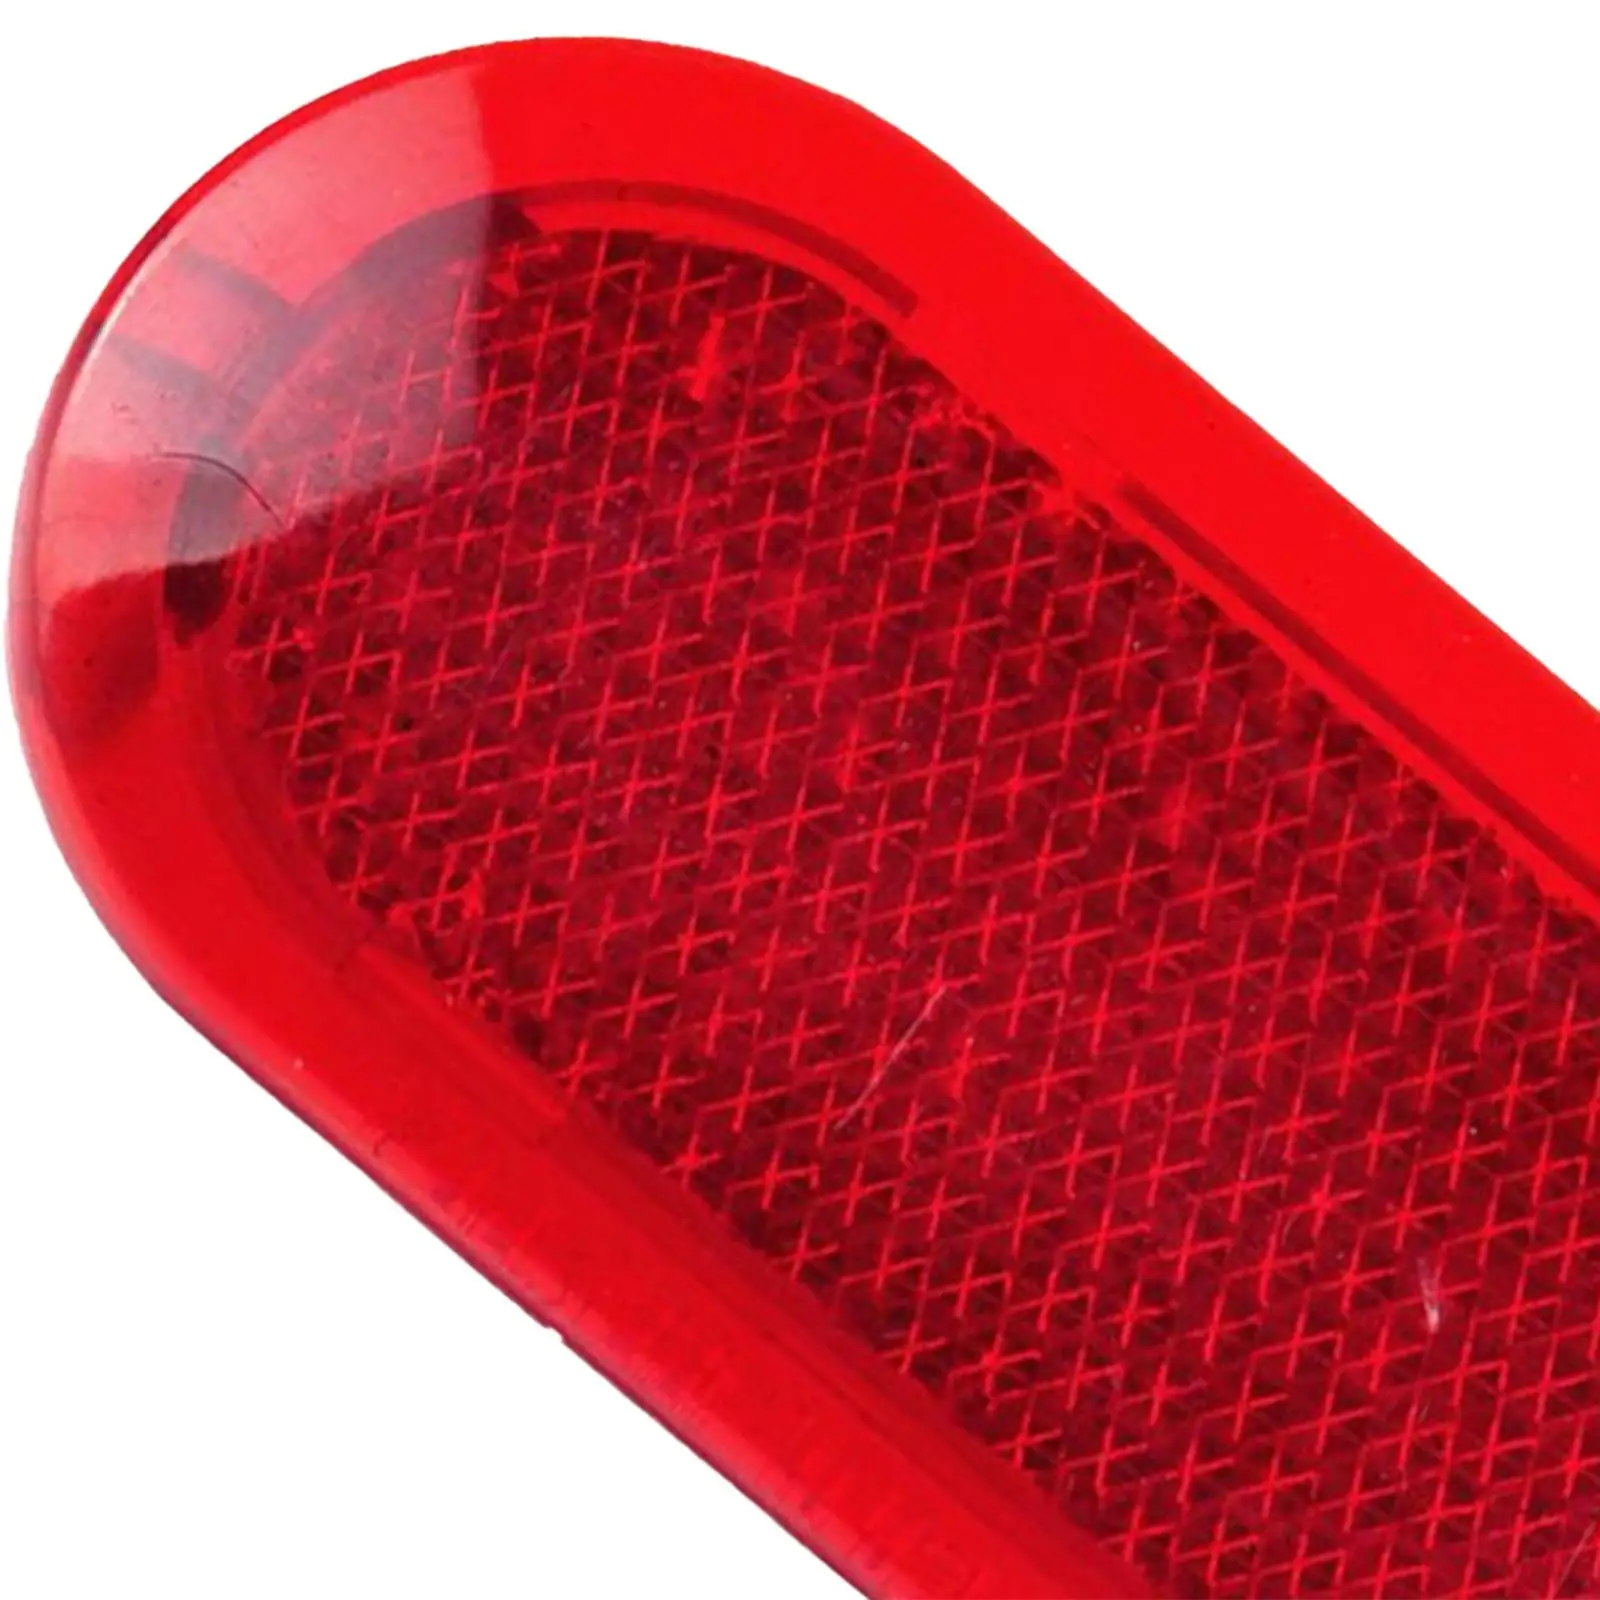 Car Door Panel Warning Light Reflector Red 6Q0947419 for VW Touran Touran Easy Installation Automotive Accessories